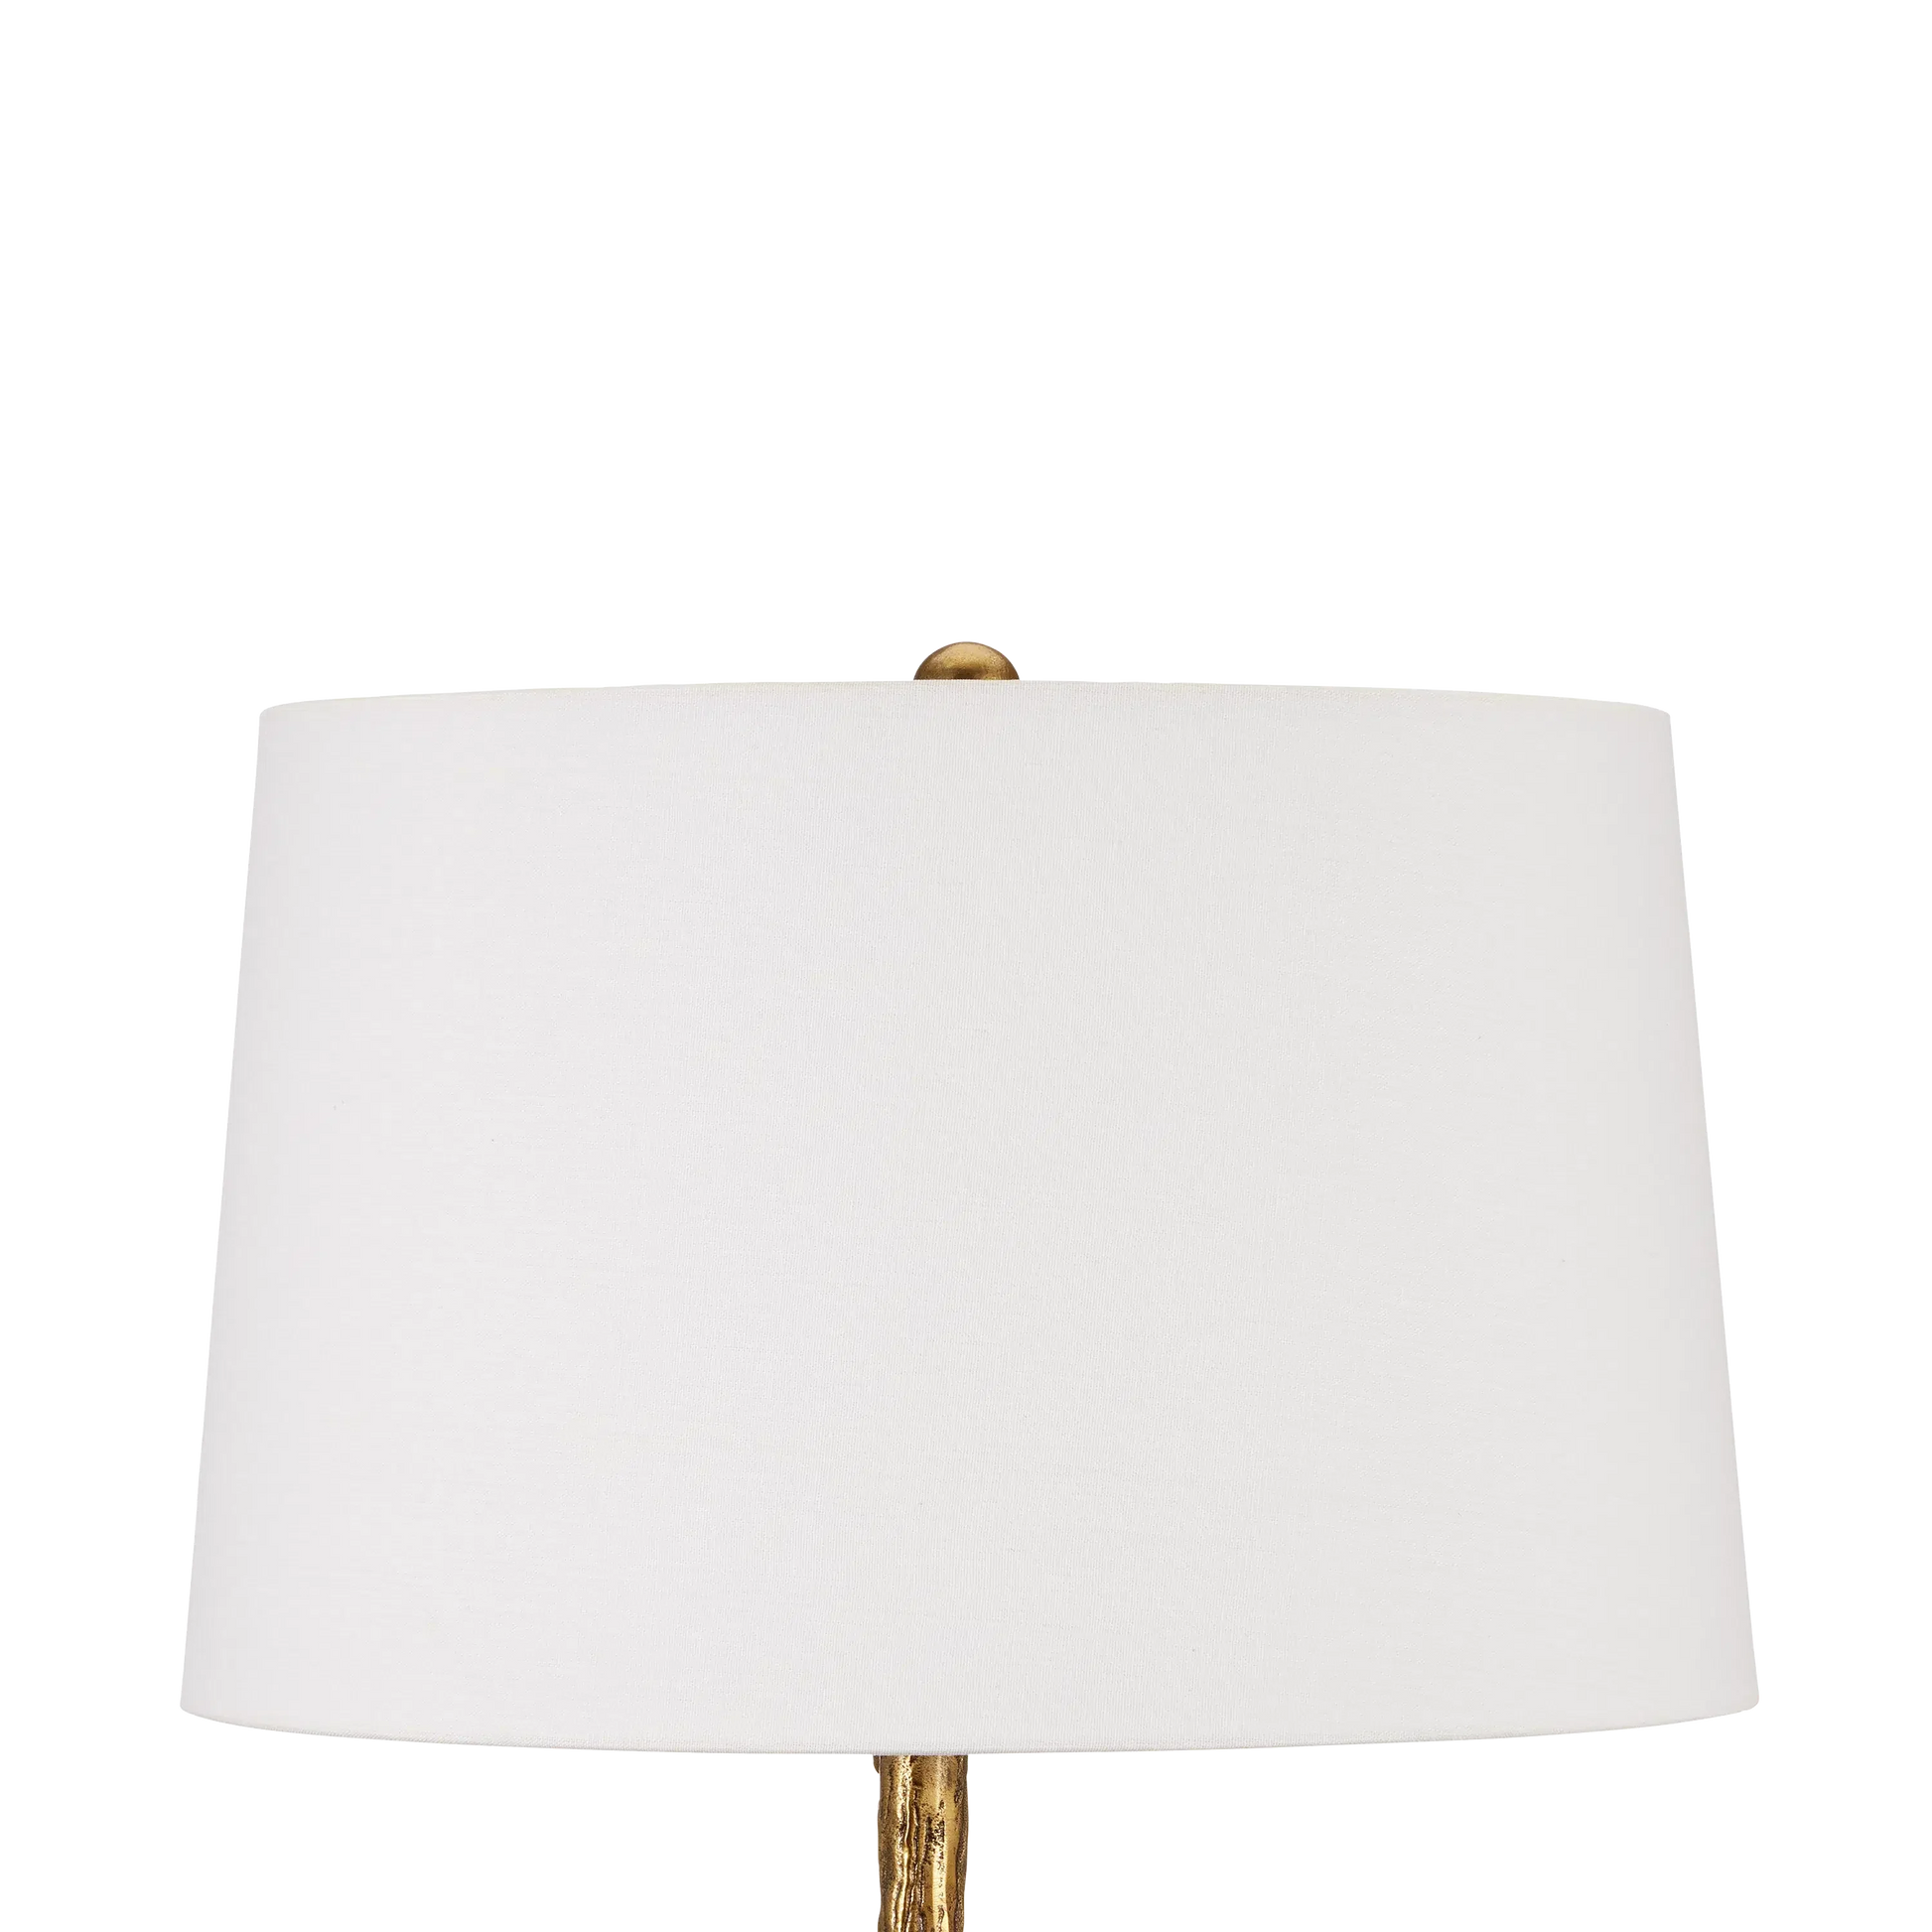 Piaf Brass Floor Lamp-Floor Lamps-Currey & Co-Sideboards and Things